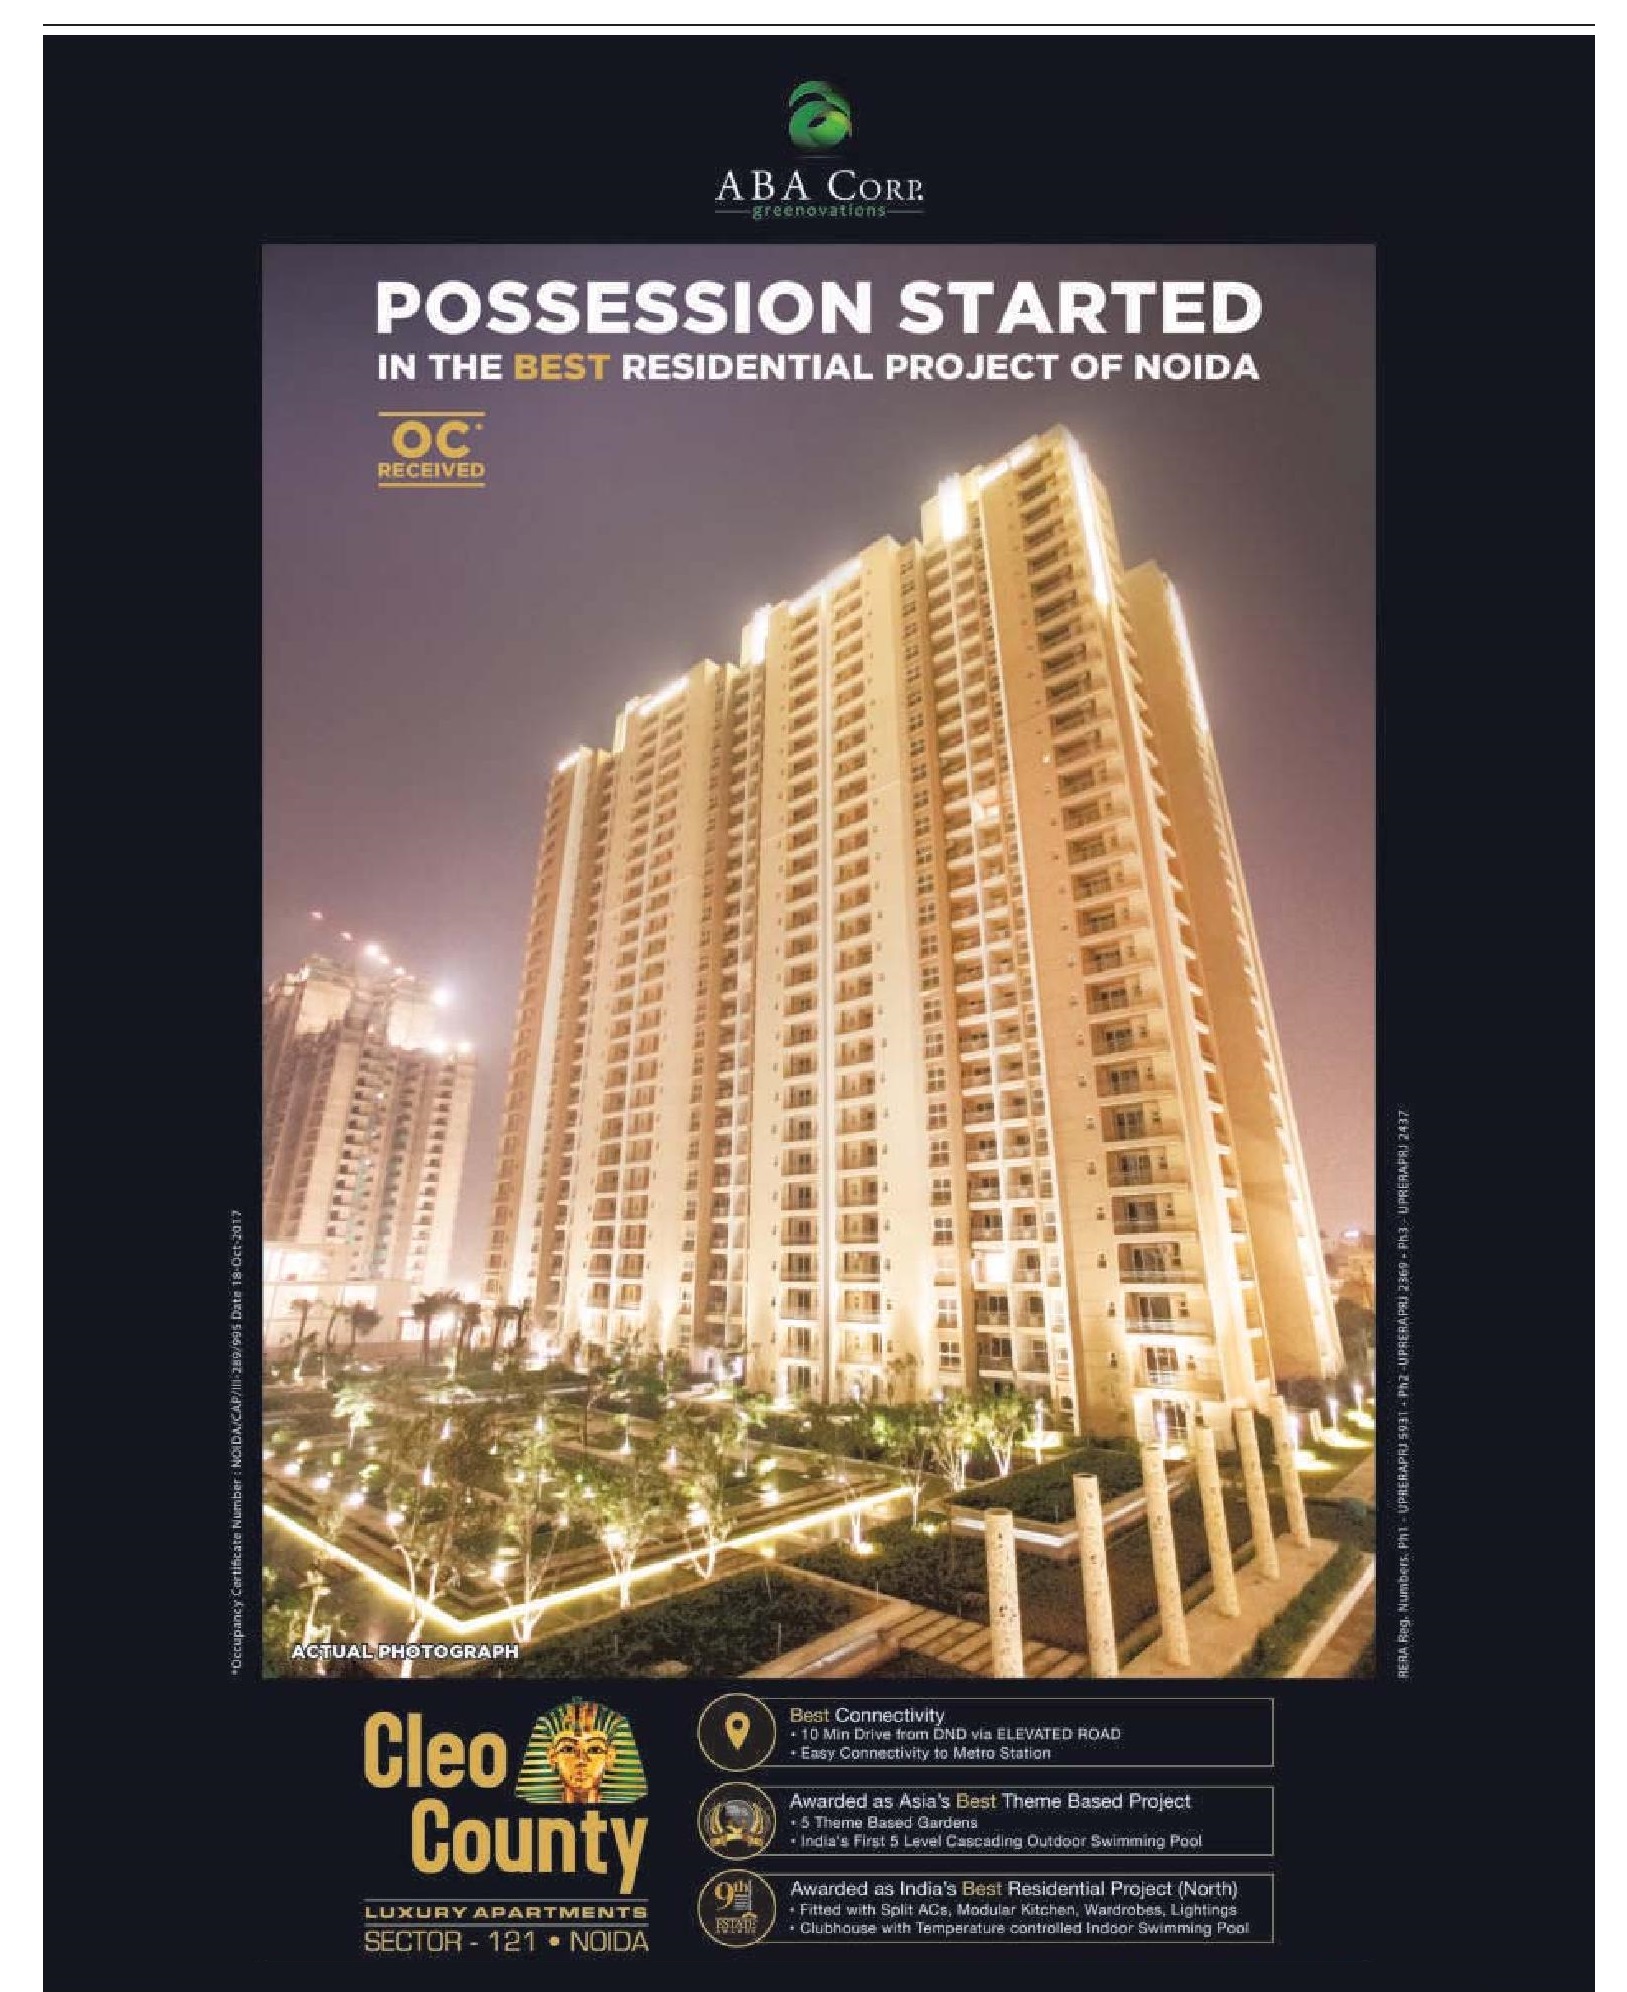 ABA Cleo County - Possession started in the best residential project of Noida Update